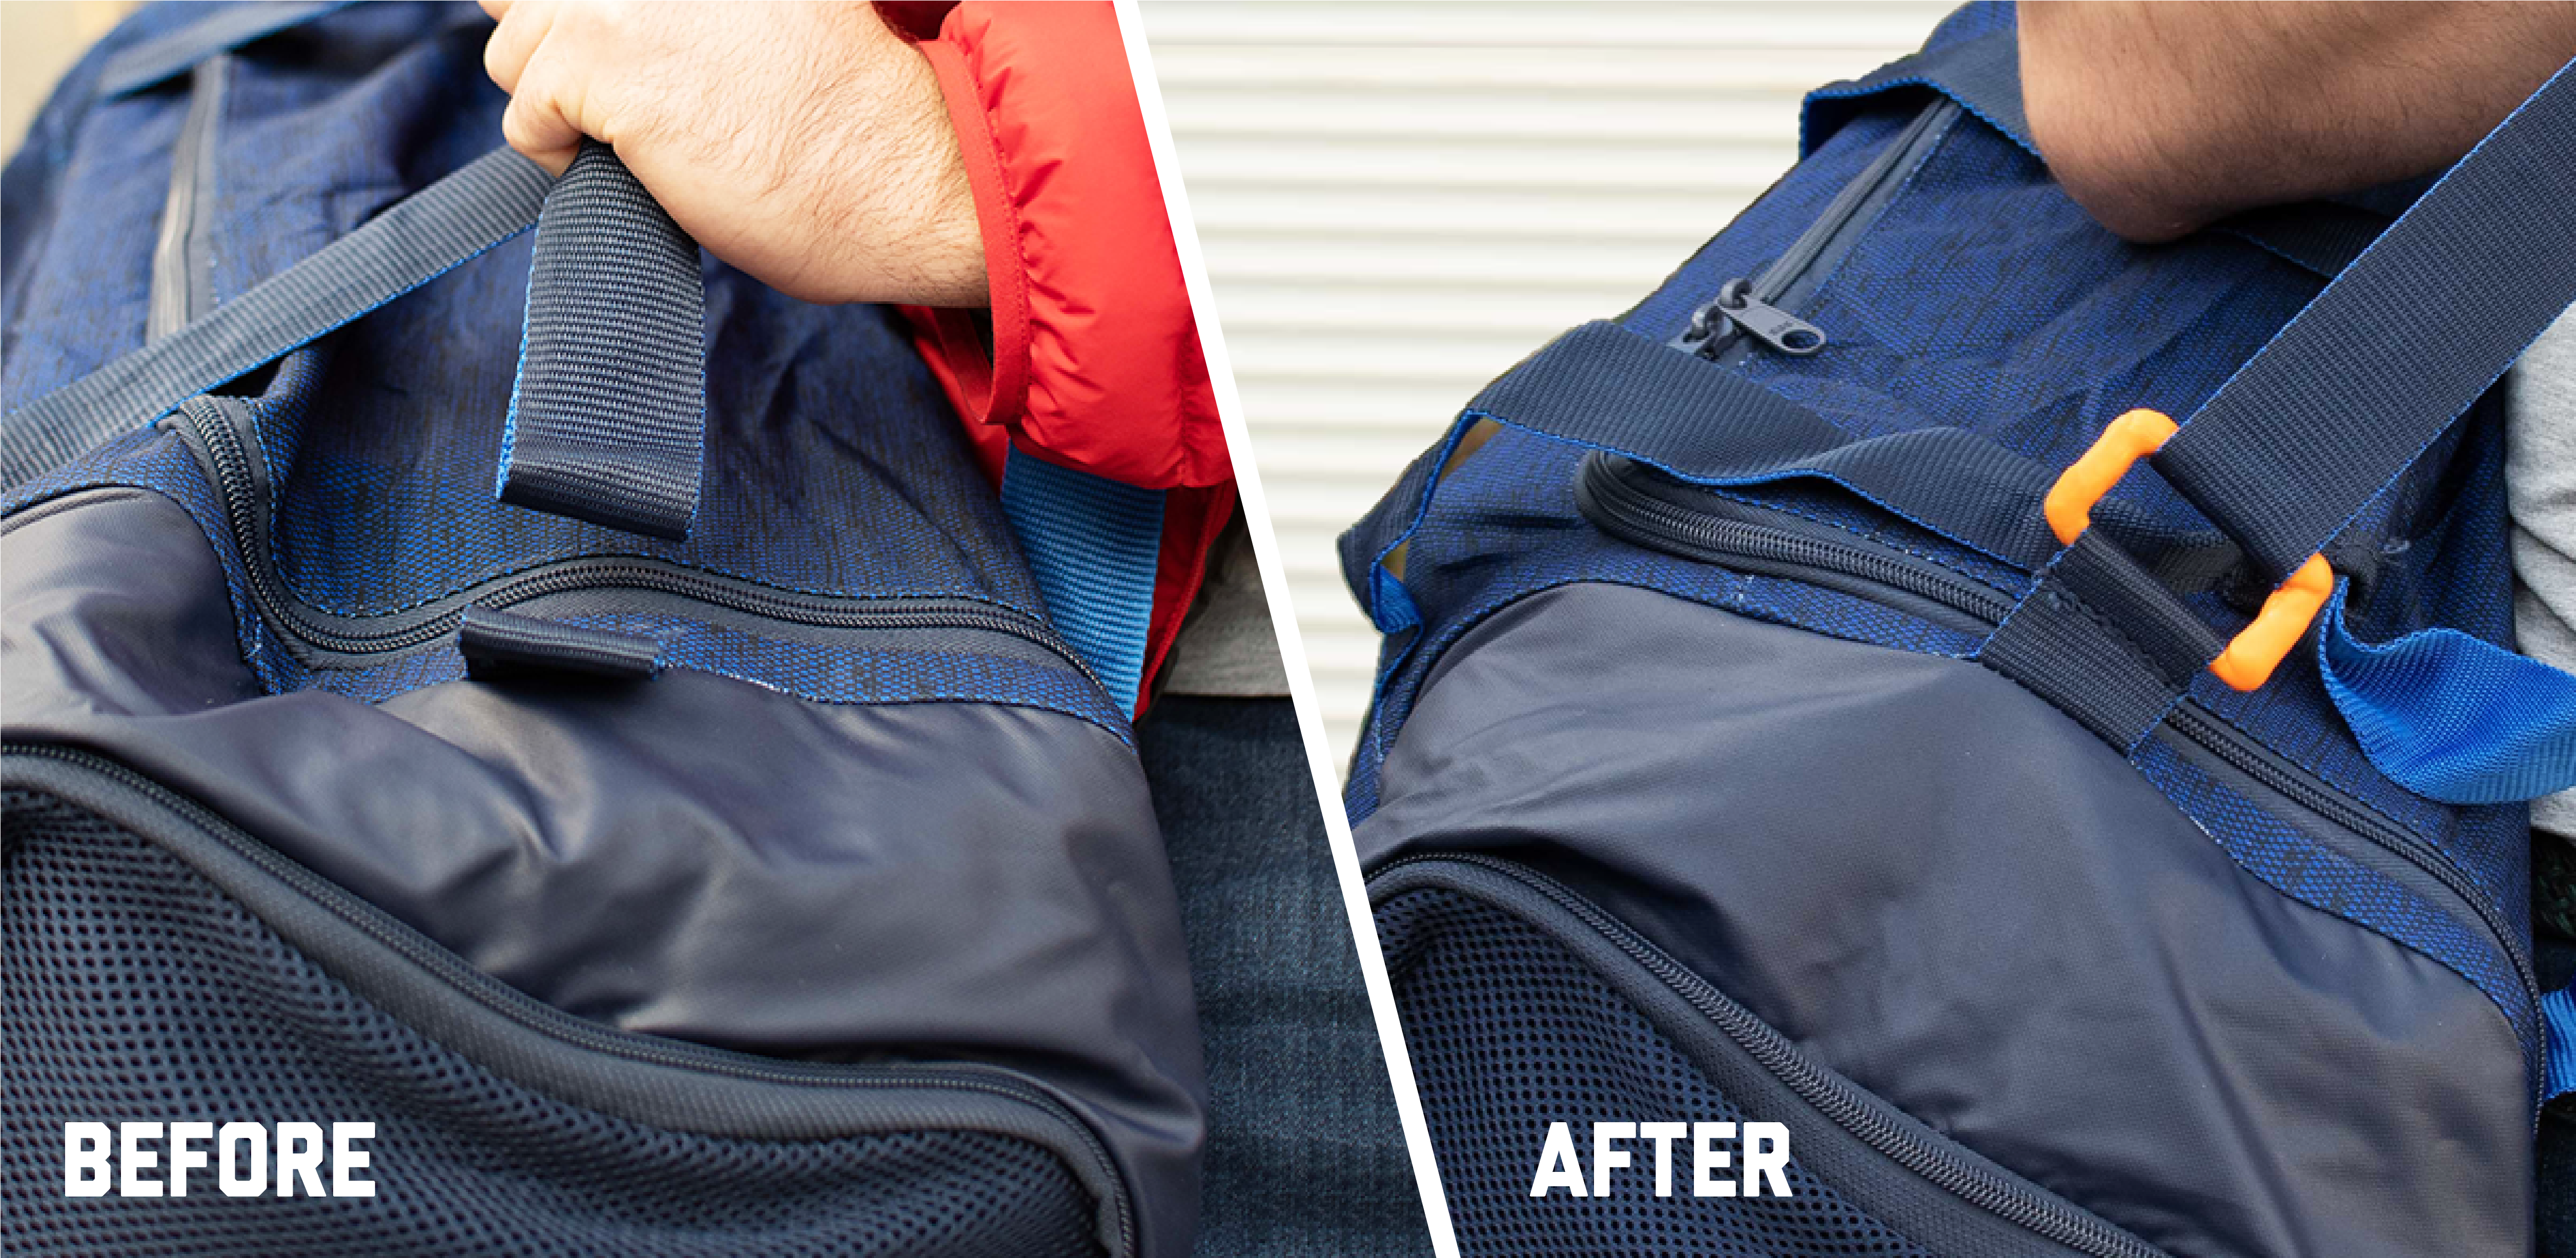 Before and After - bag buckle fix using fixits